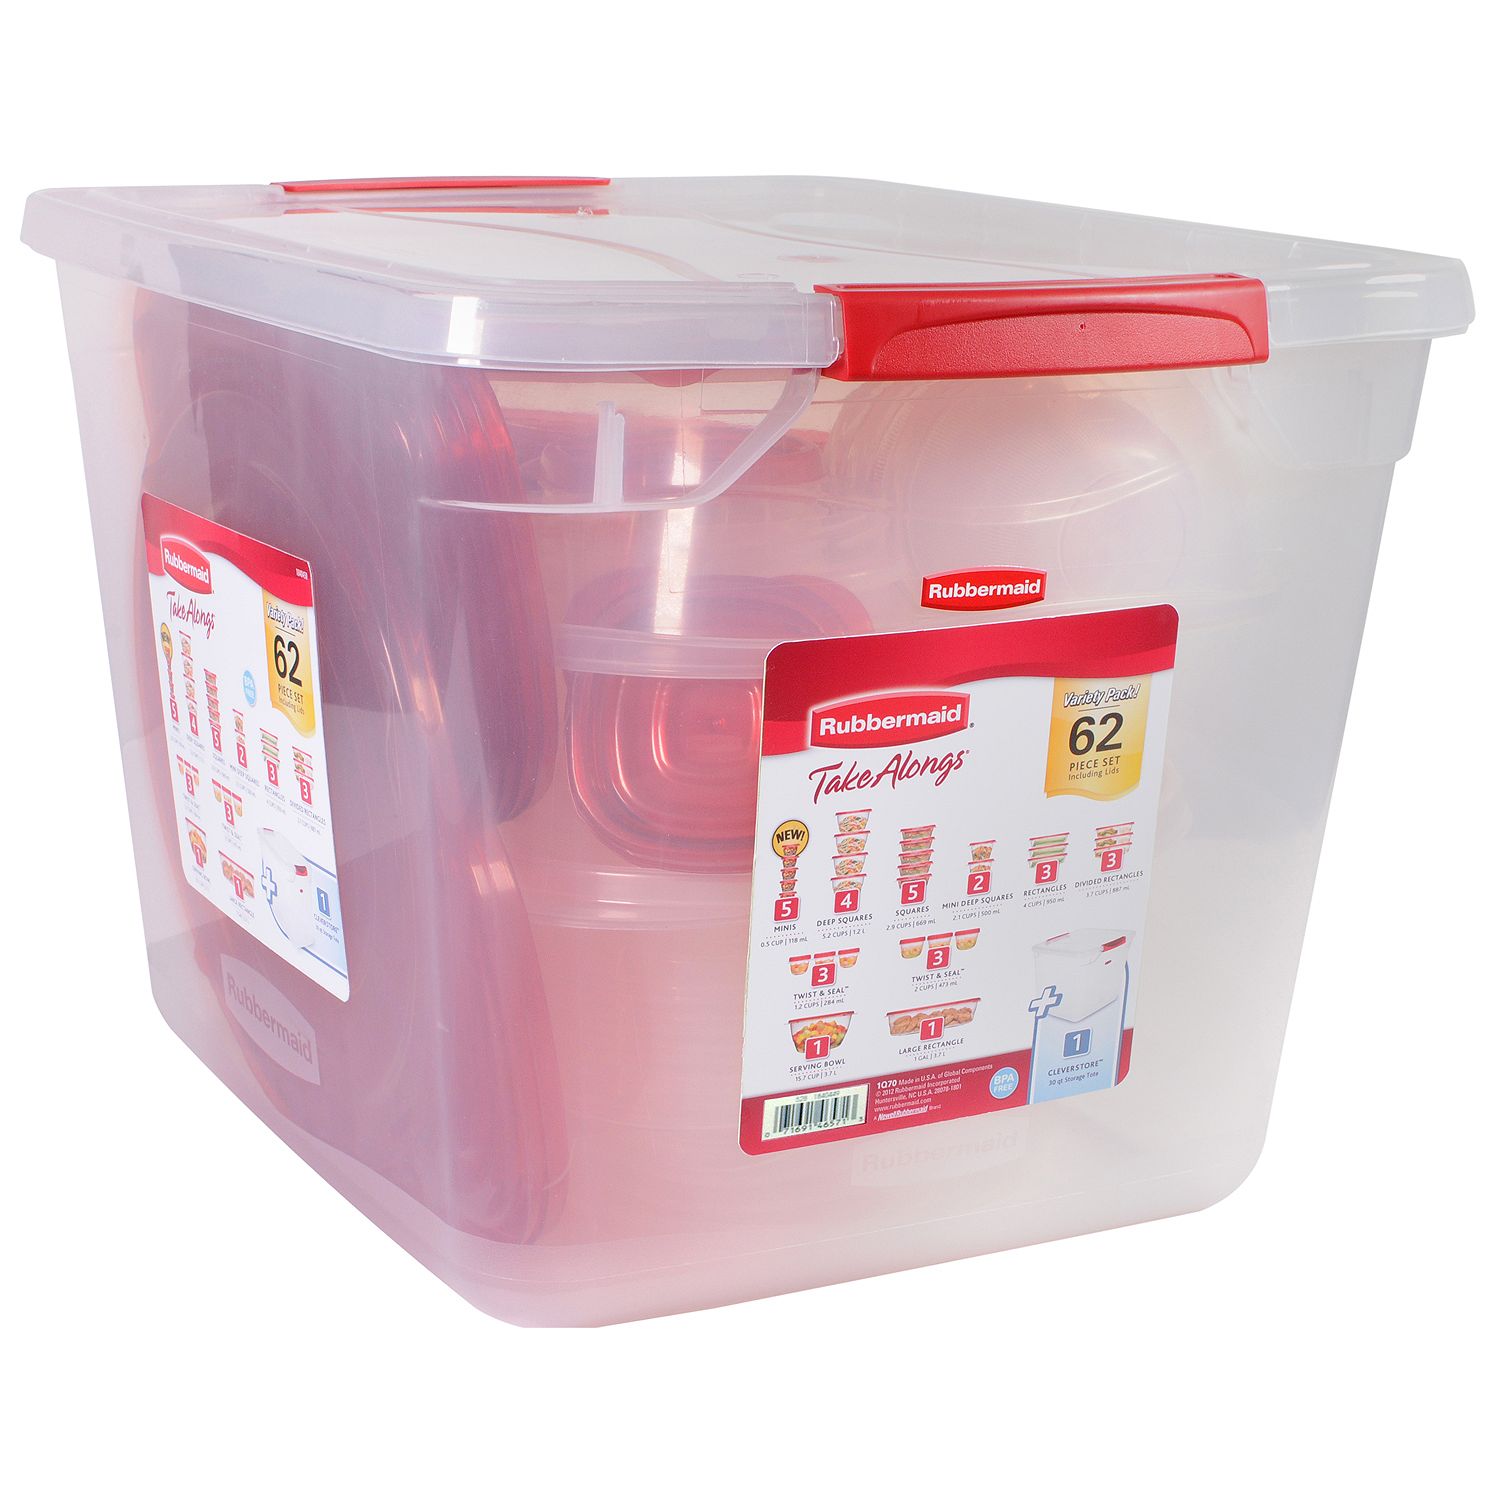 Expires soon! Rubbermaid 62-piece TakeAlongs food storage set for $13 at Sam’s Club